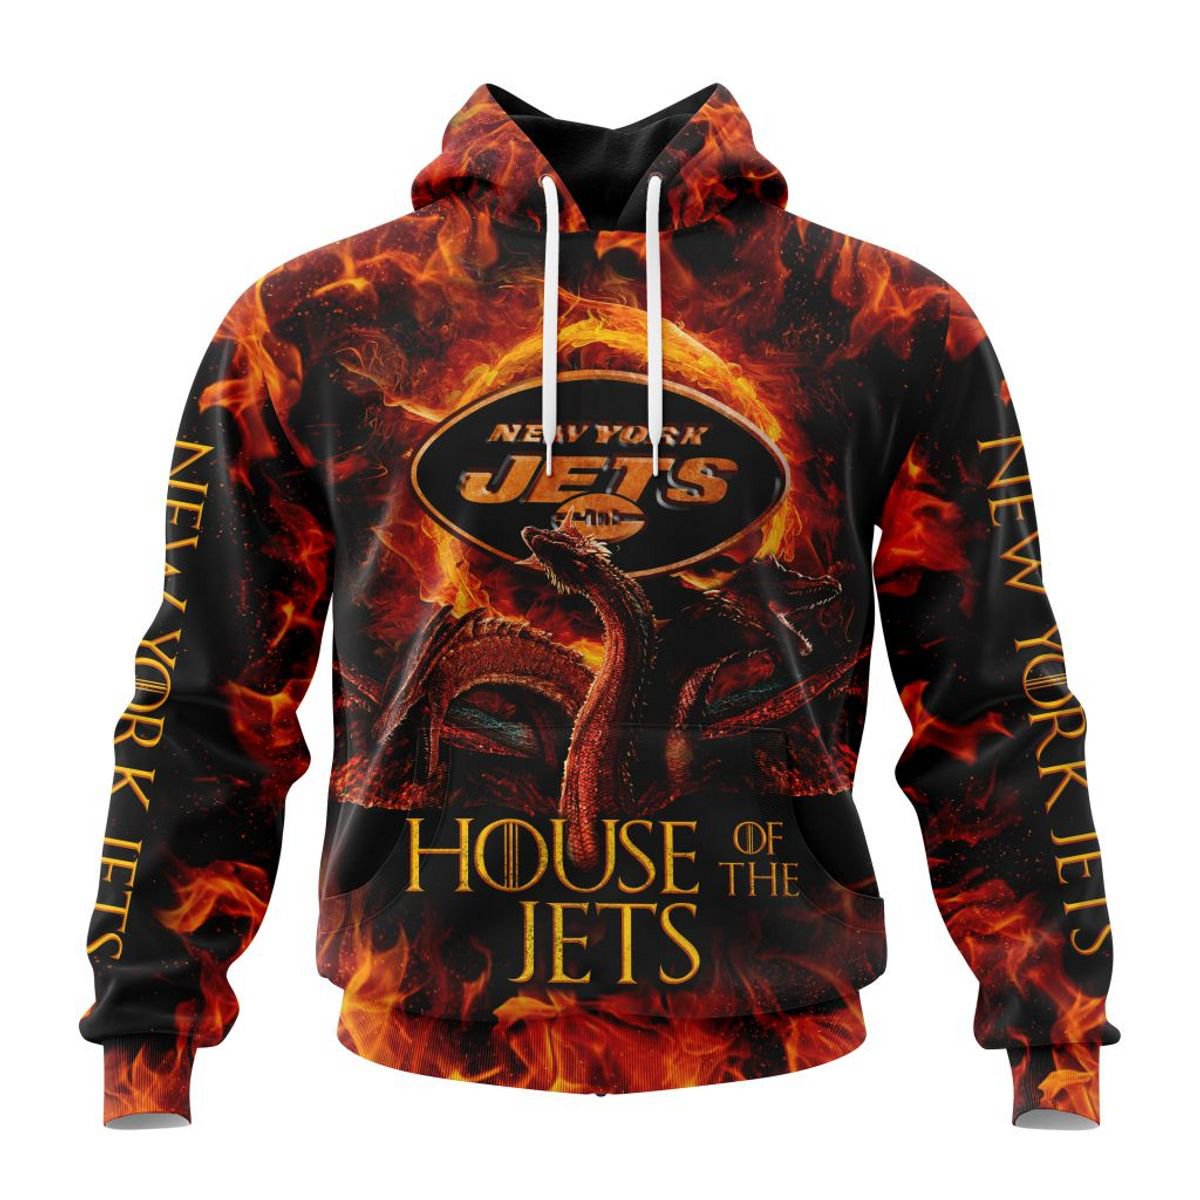 NEW YORK JETS GAME OF THRONES – HOUSE OF THE JETS 3D HOODIE